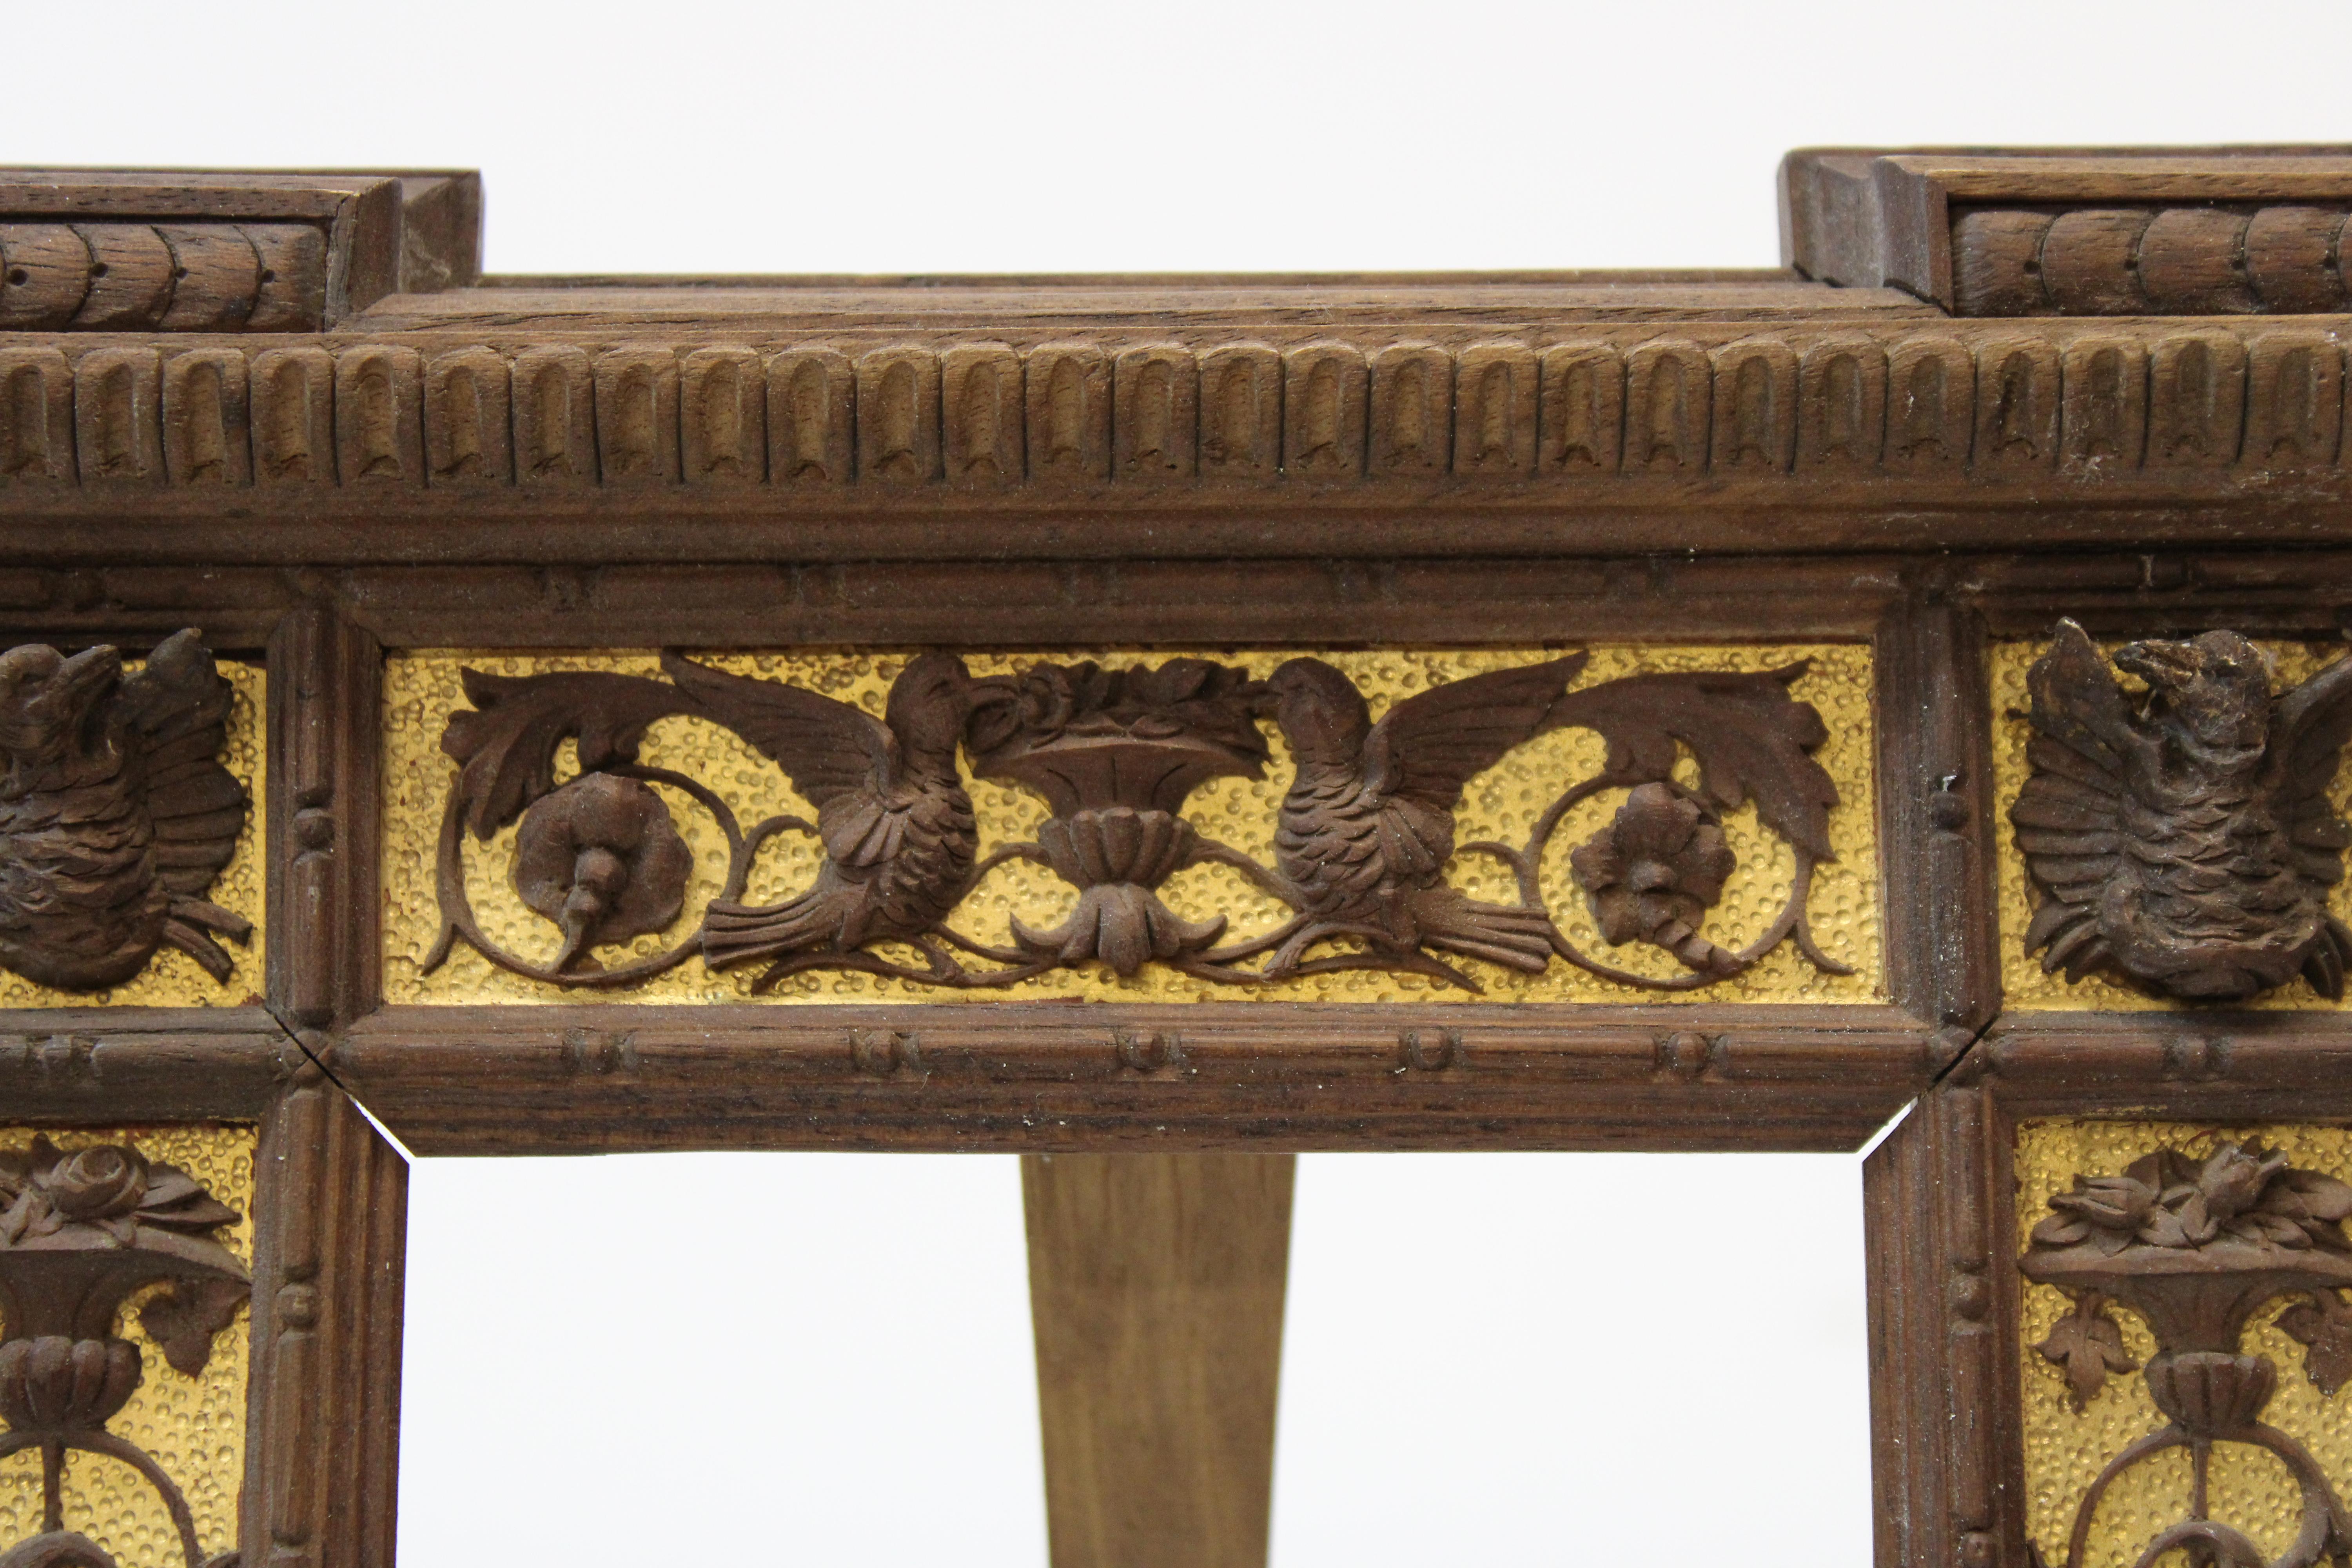 C. 20th century - charming hand carved wood easel frame w/ gold tones & adorable birds.